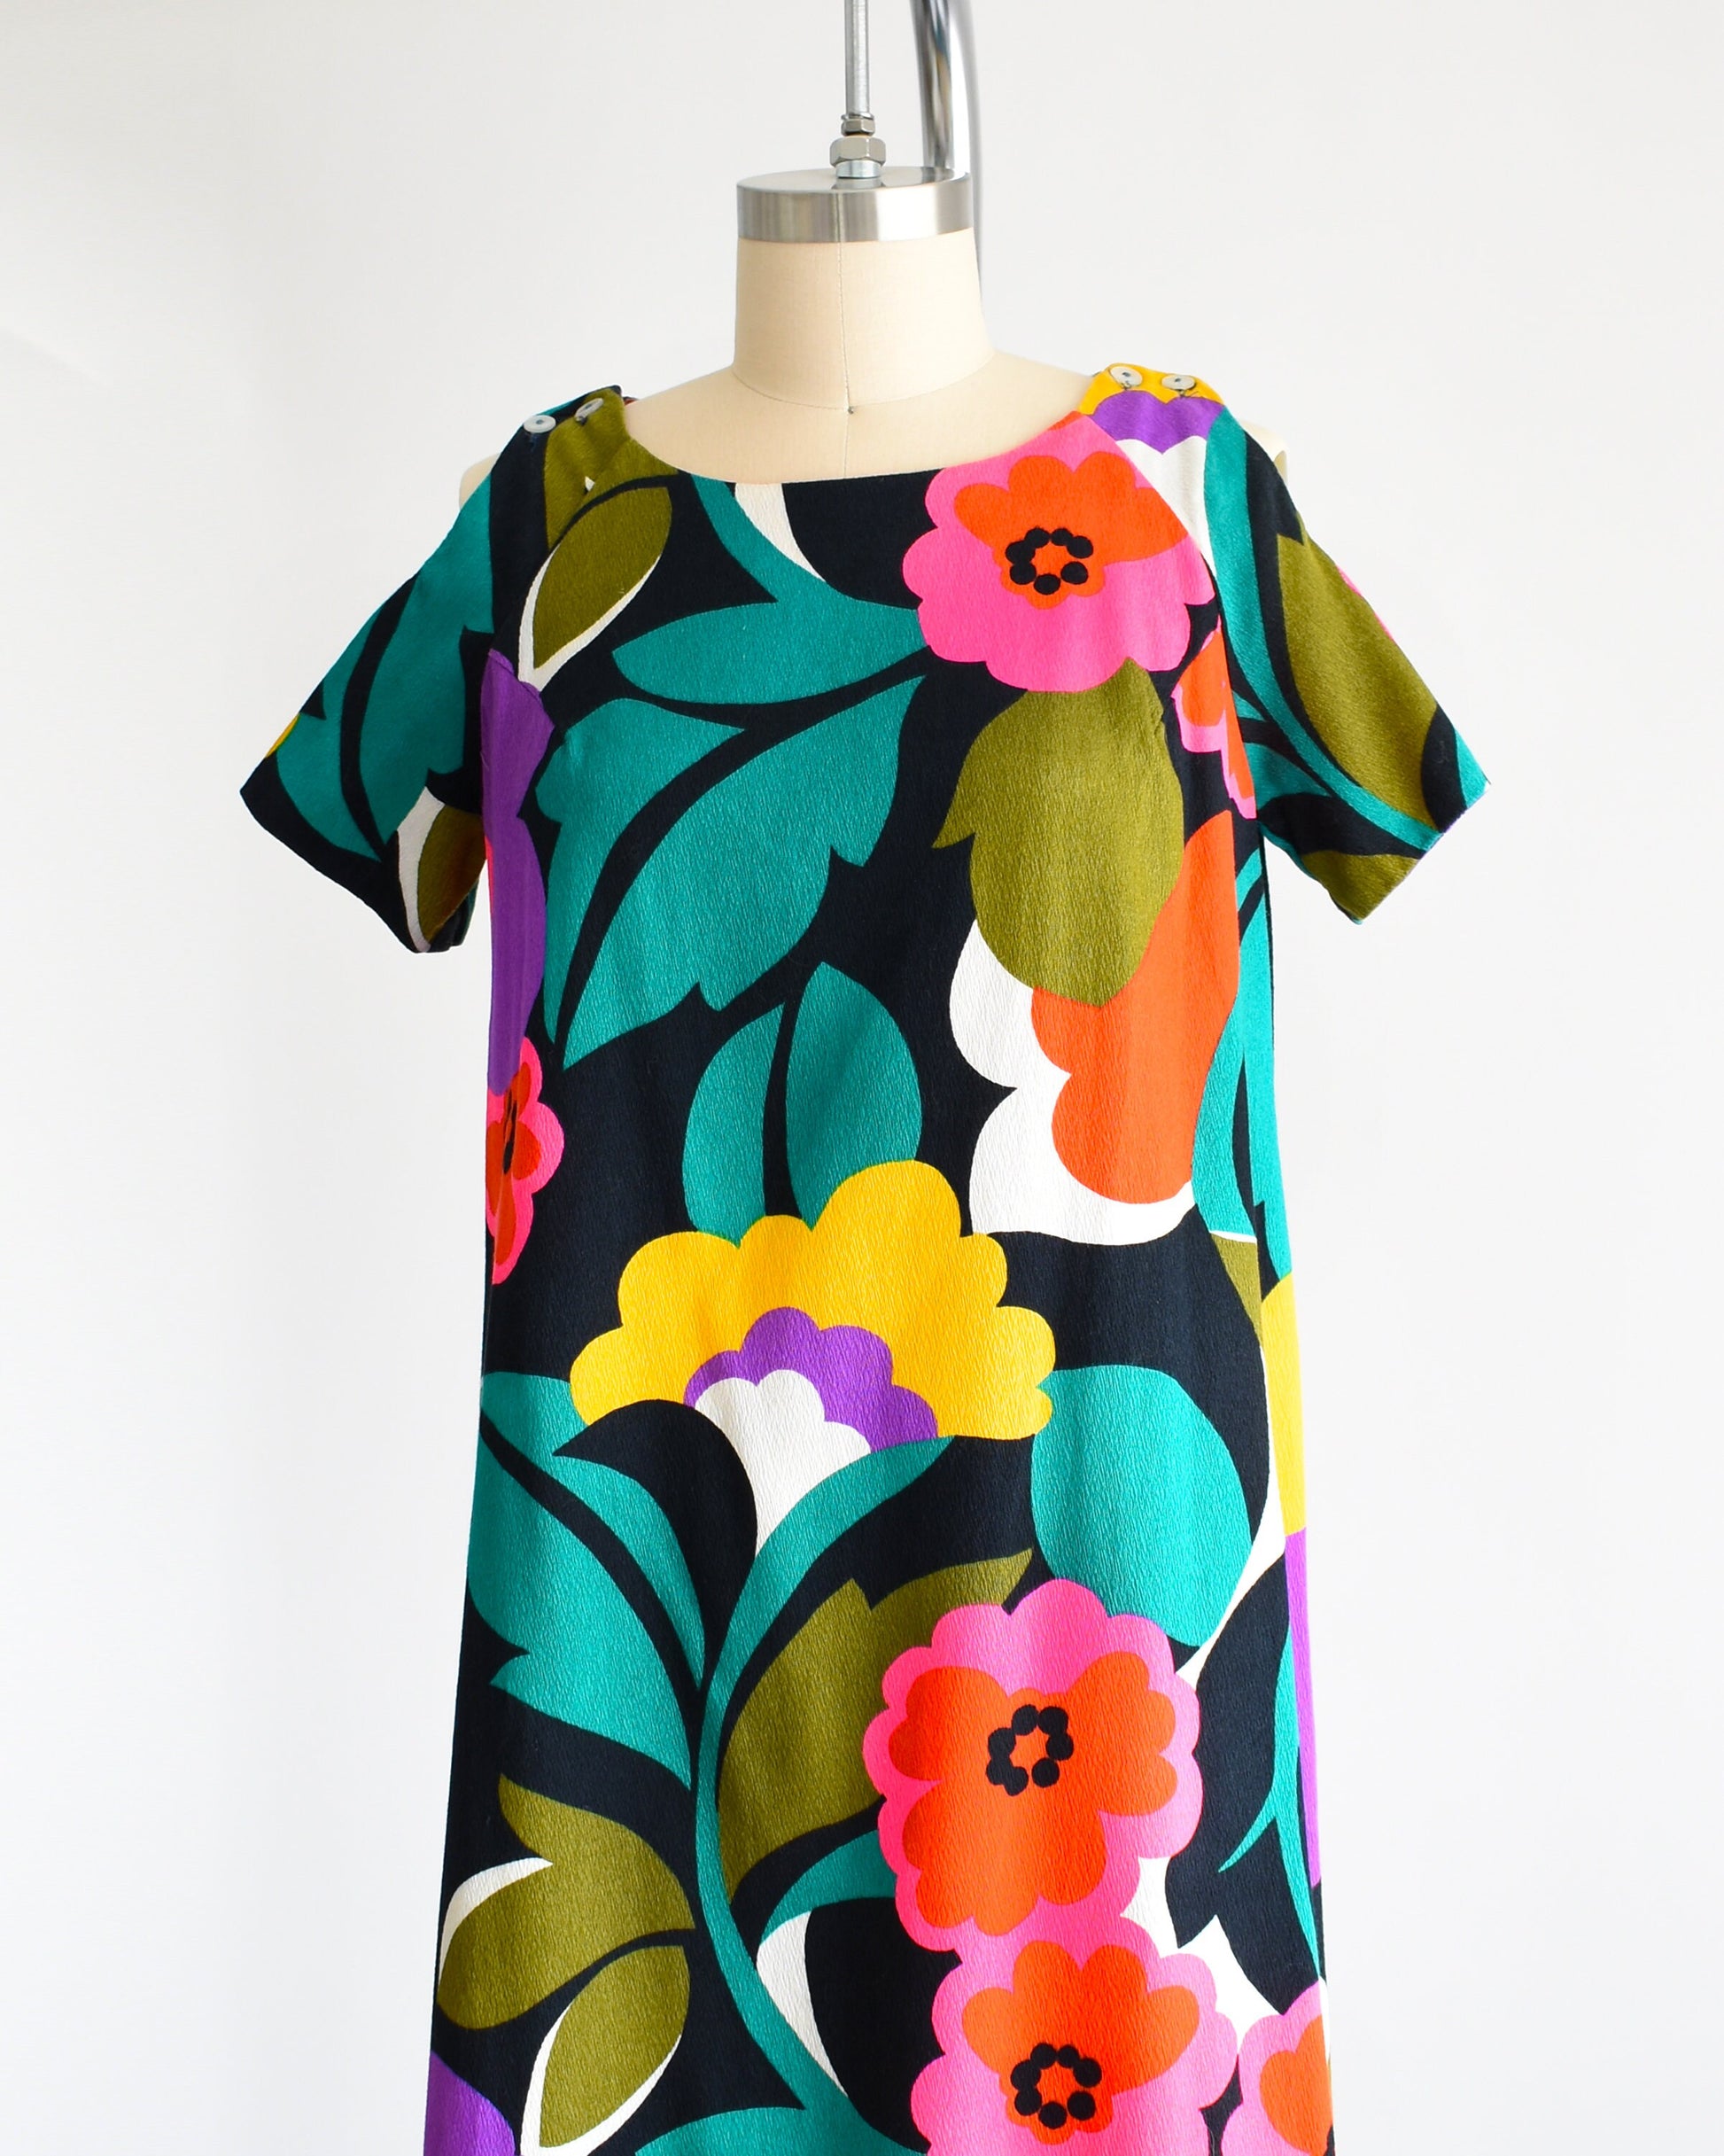 Side front view of a vintage 70s Hawaiian floral maxi dress with black woven cotton that has a vibrant flower power print all over. Cold shoulder neckline with two buttons on each side, open shoulders, and short sleeves.